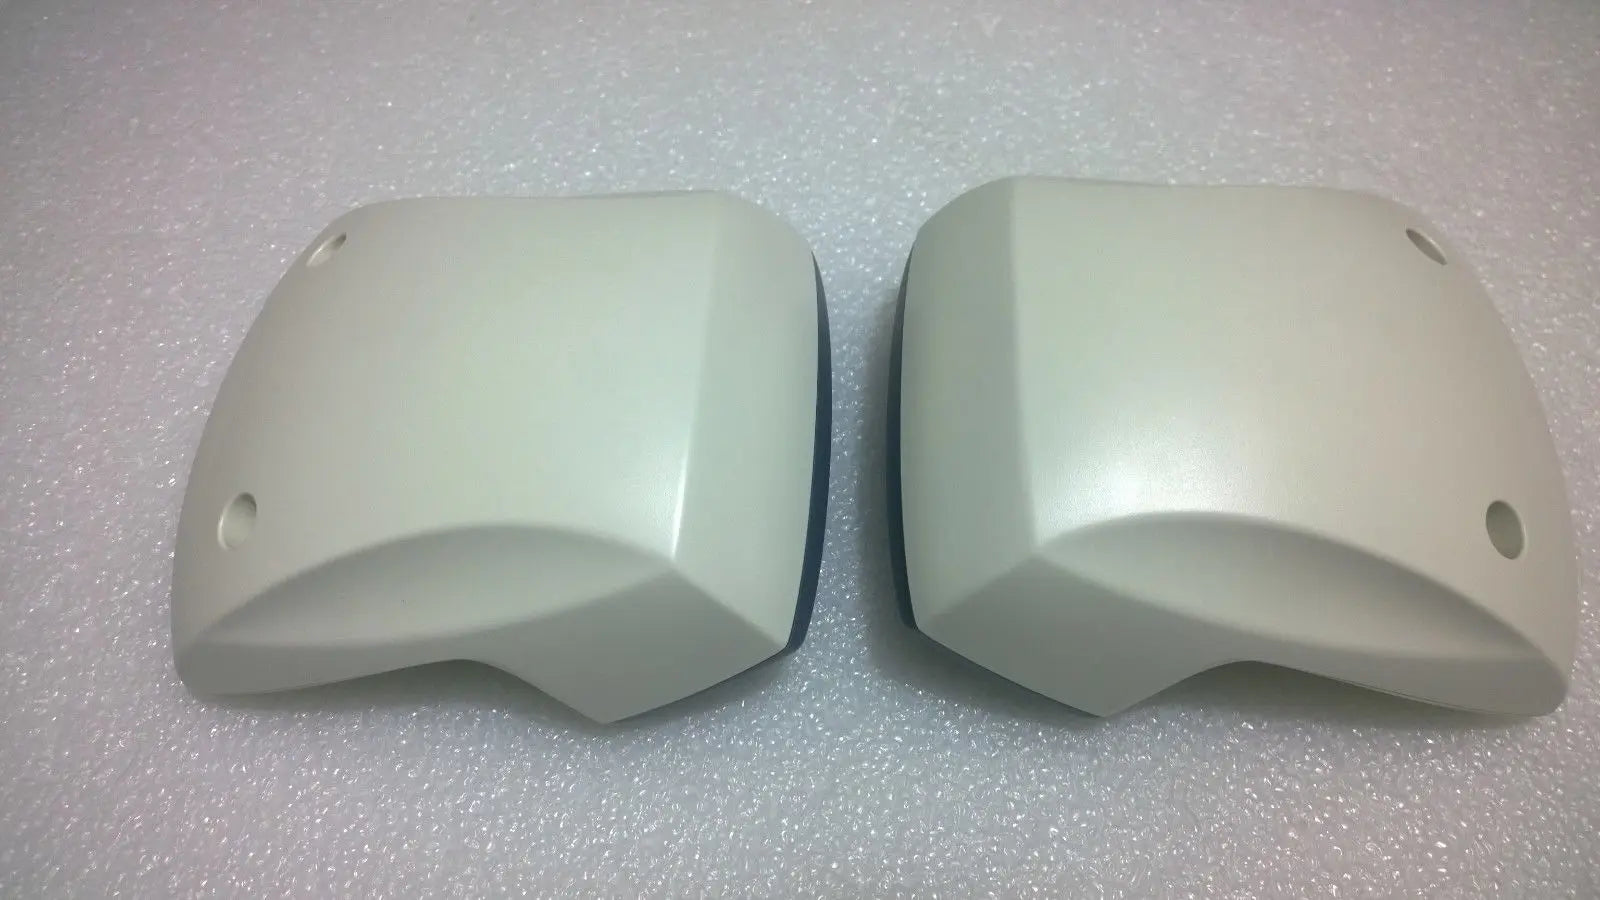 Brand New Pair of GE Logiq S6 P5 Ultrasound Speakers (For use with GA500 LCD) DIAGNOSTIC ULTRASOUND MACHINES FOR SALE